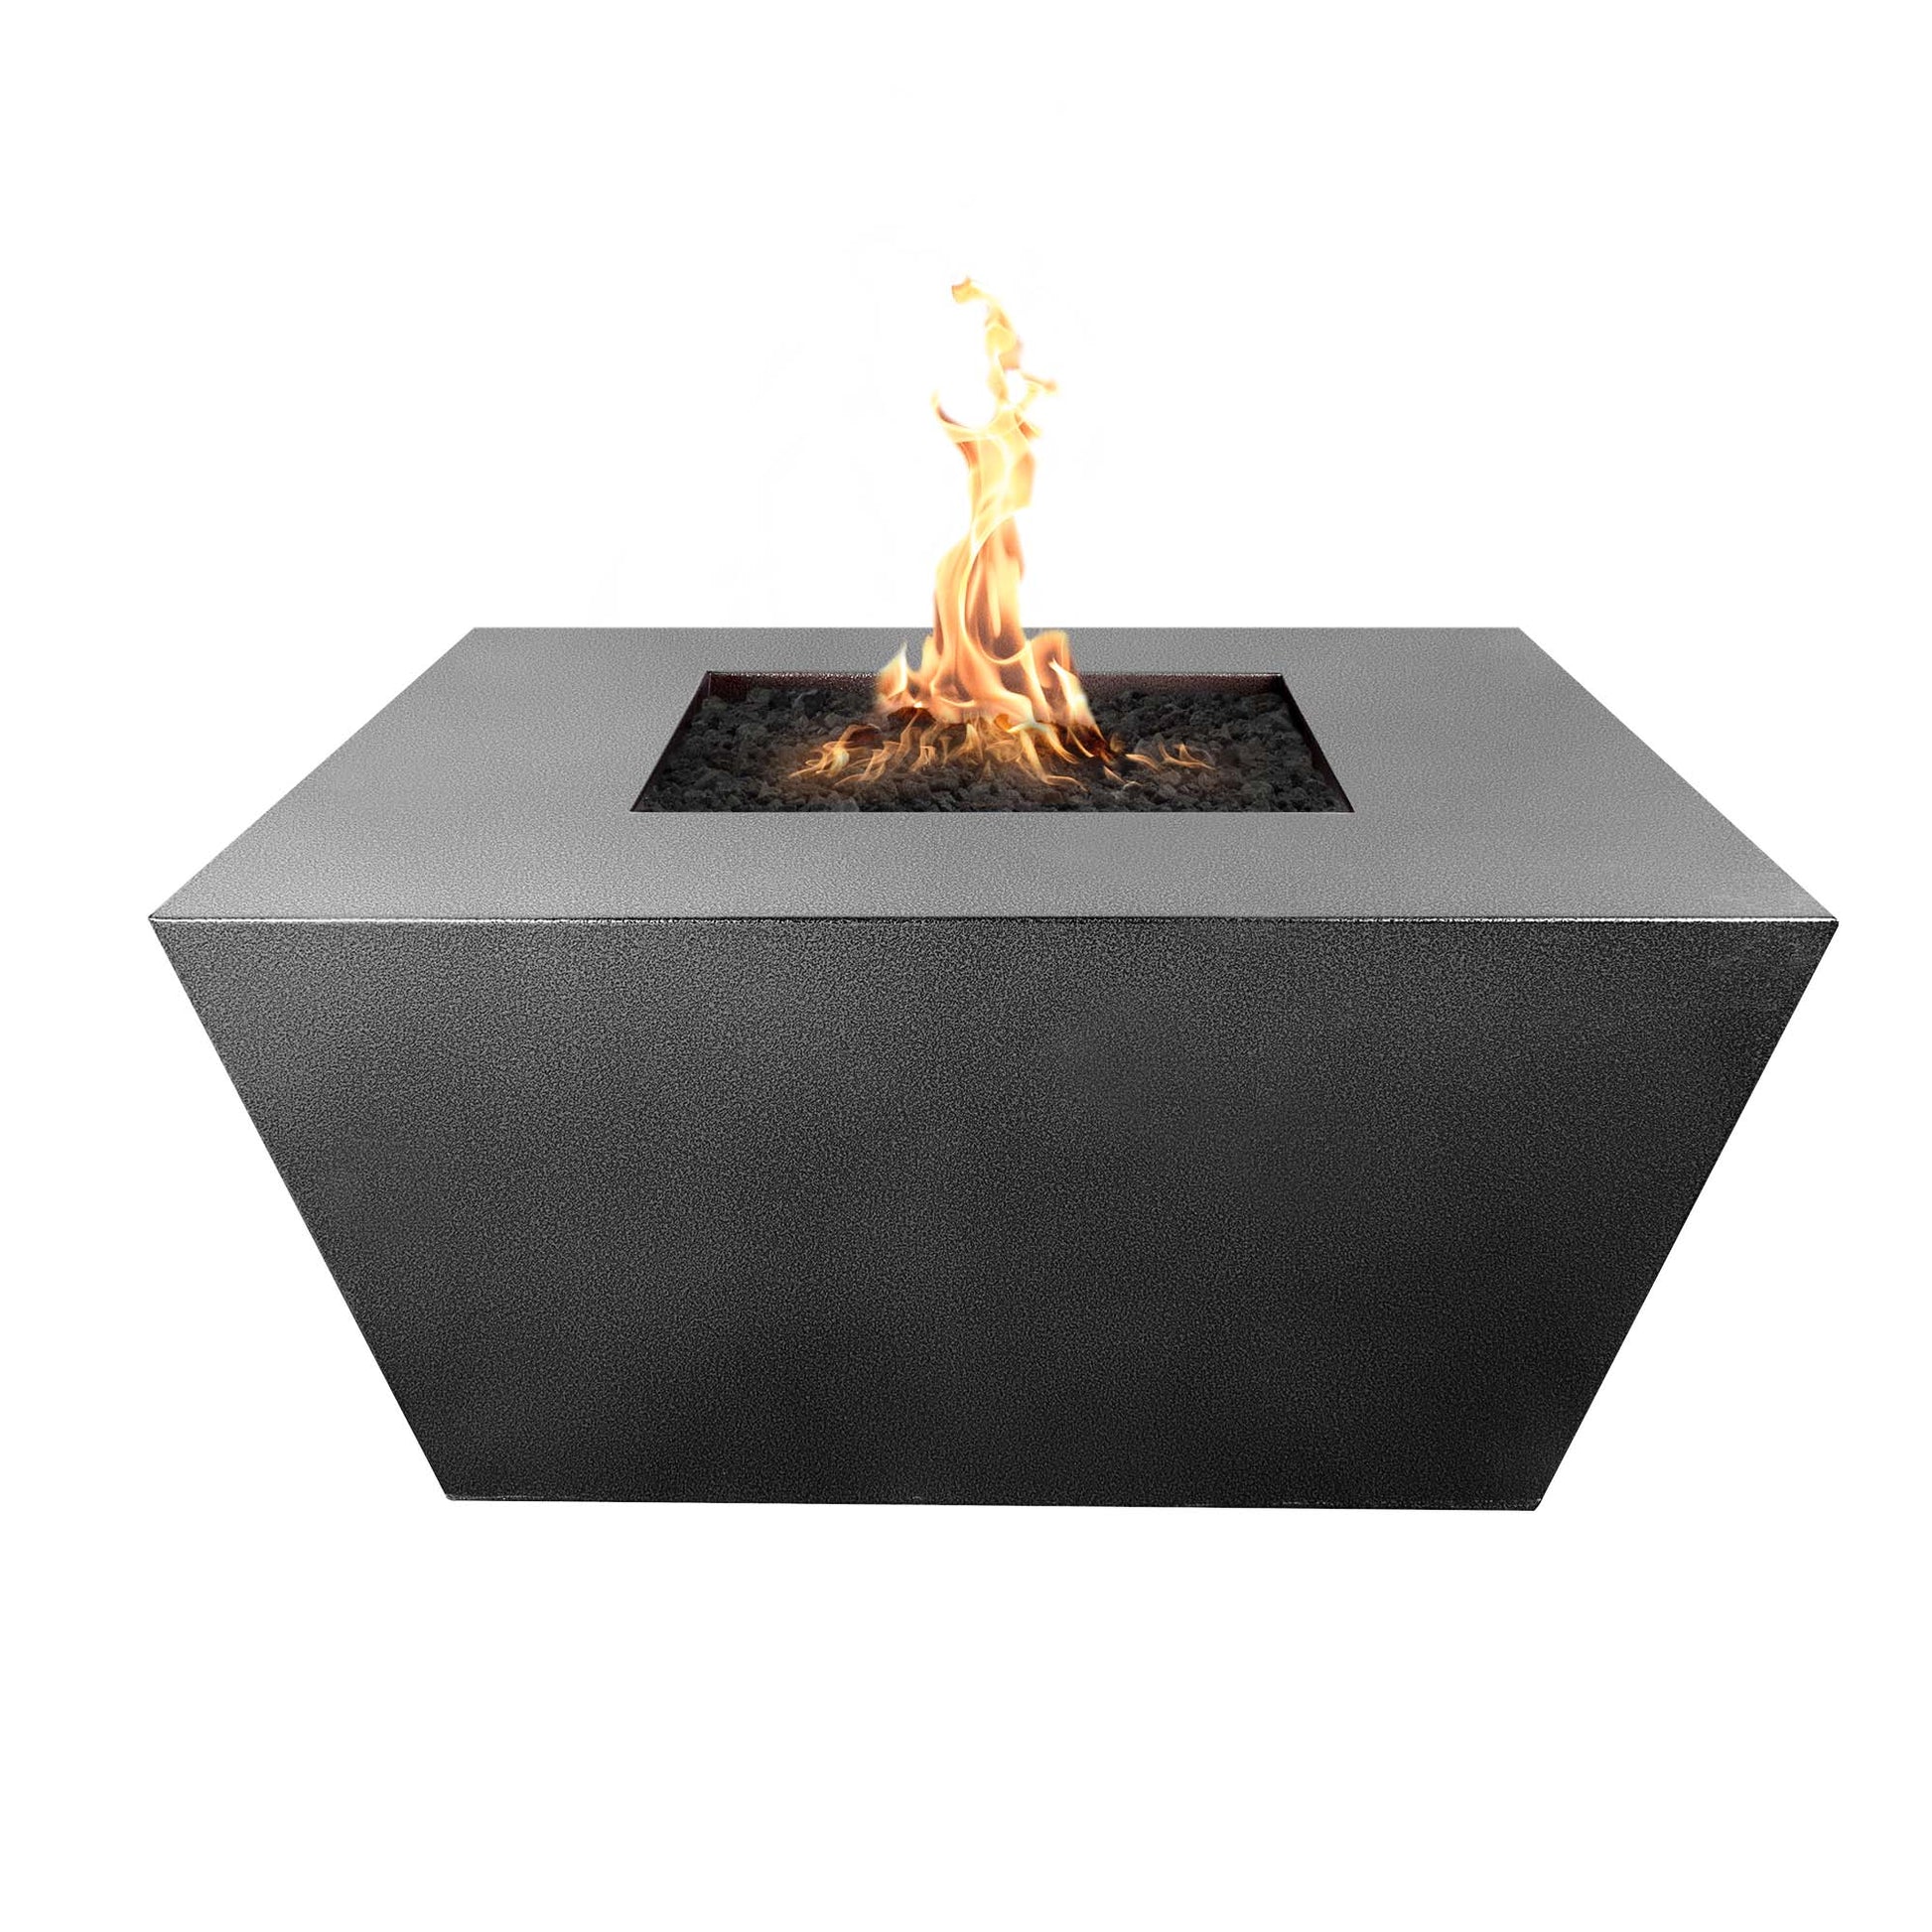 The Outdoor Plus Square Redan 48" Silver Vein Powder Coated Metal Liquid Propane Fire Pit with Match Lit Ignition